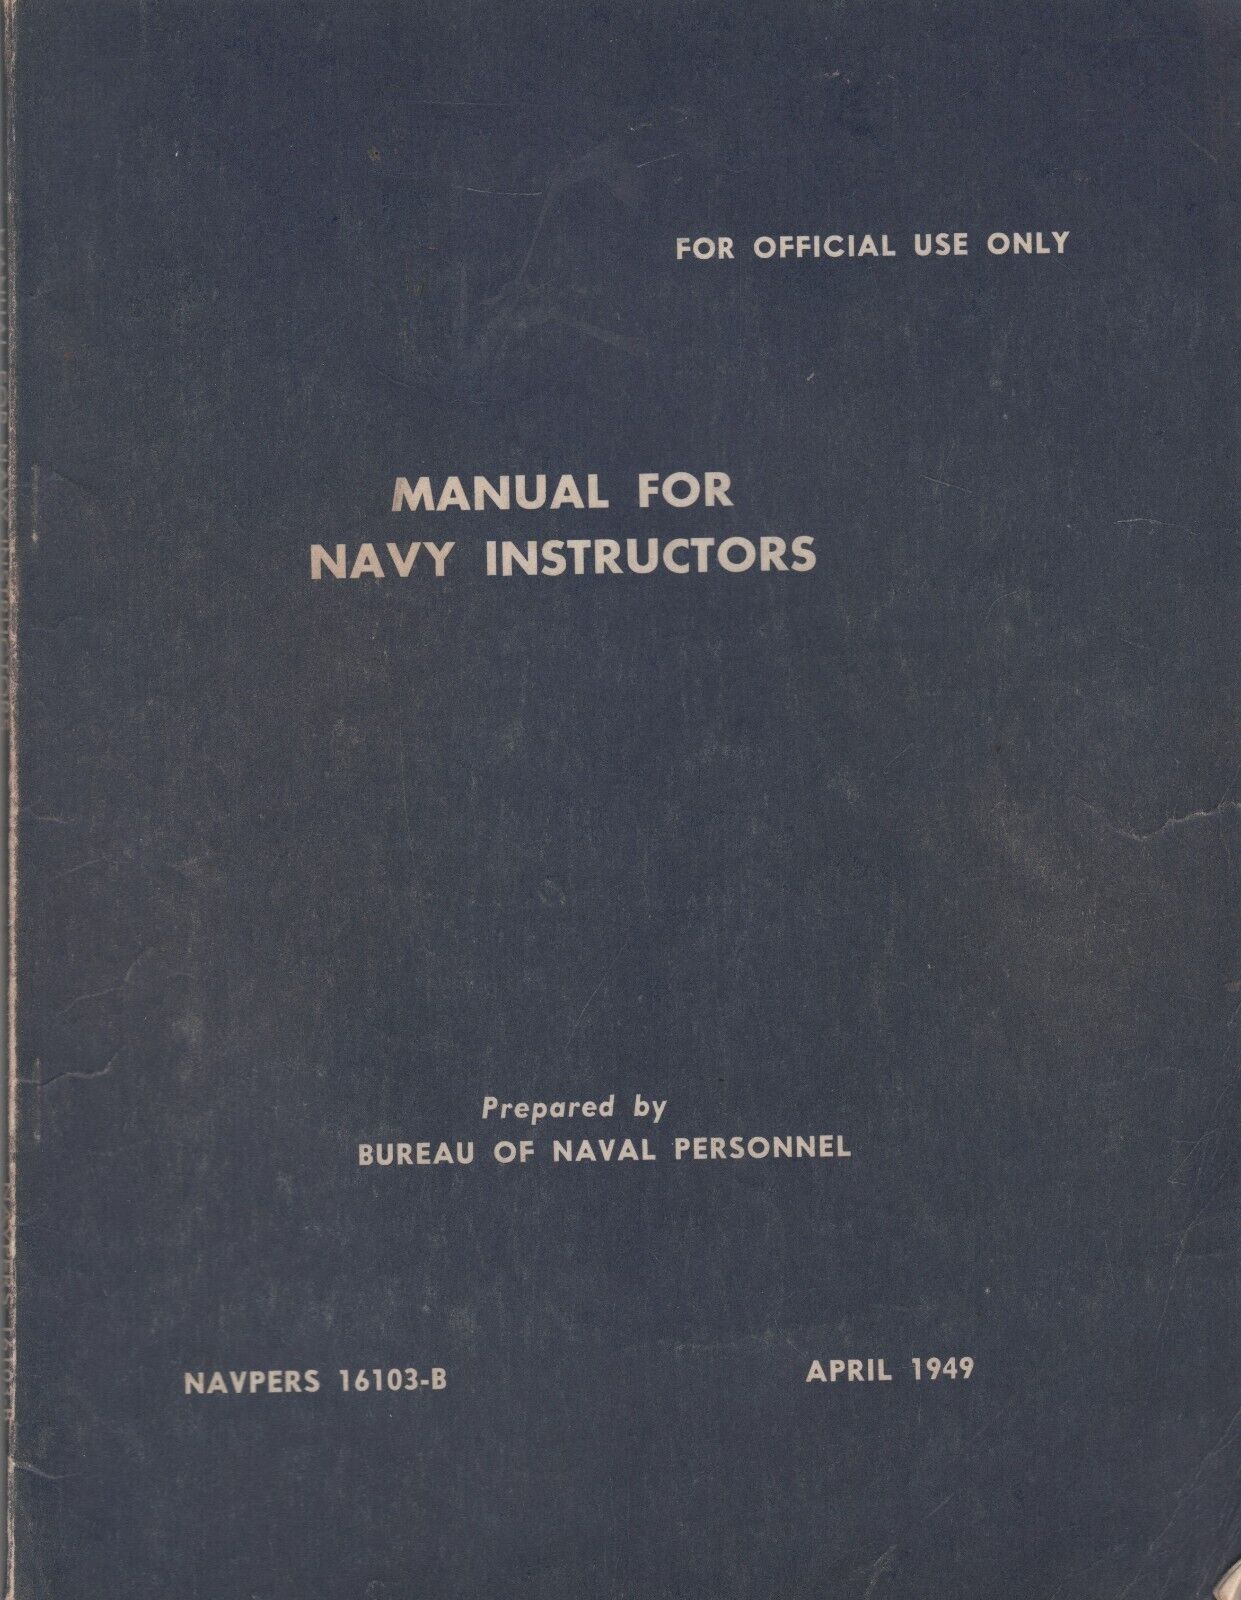 MILITARIA (1949) Book Manual For NAVY Instructors NAVPERS 16103-B